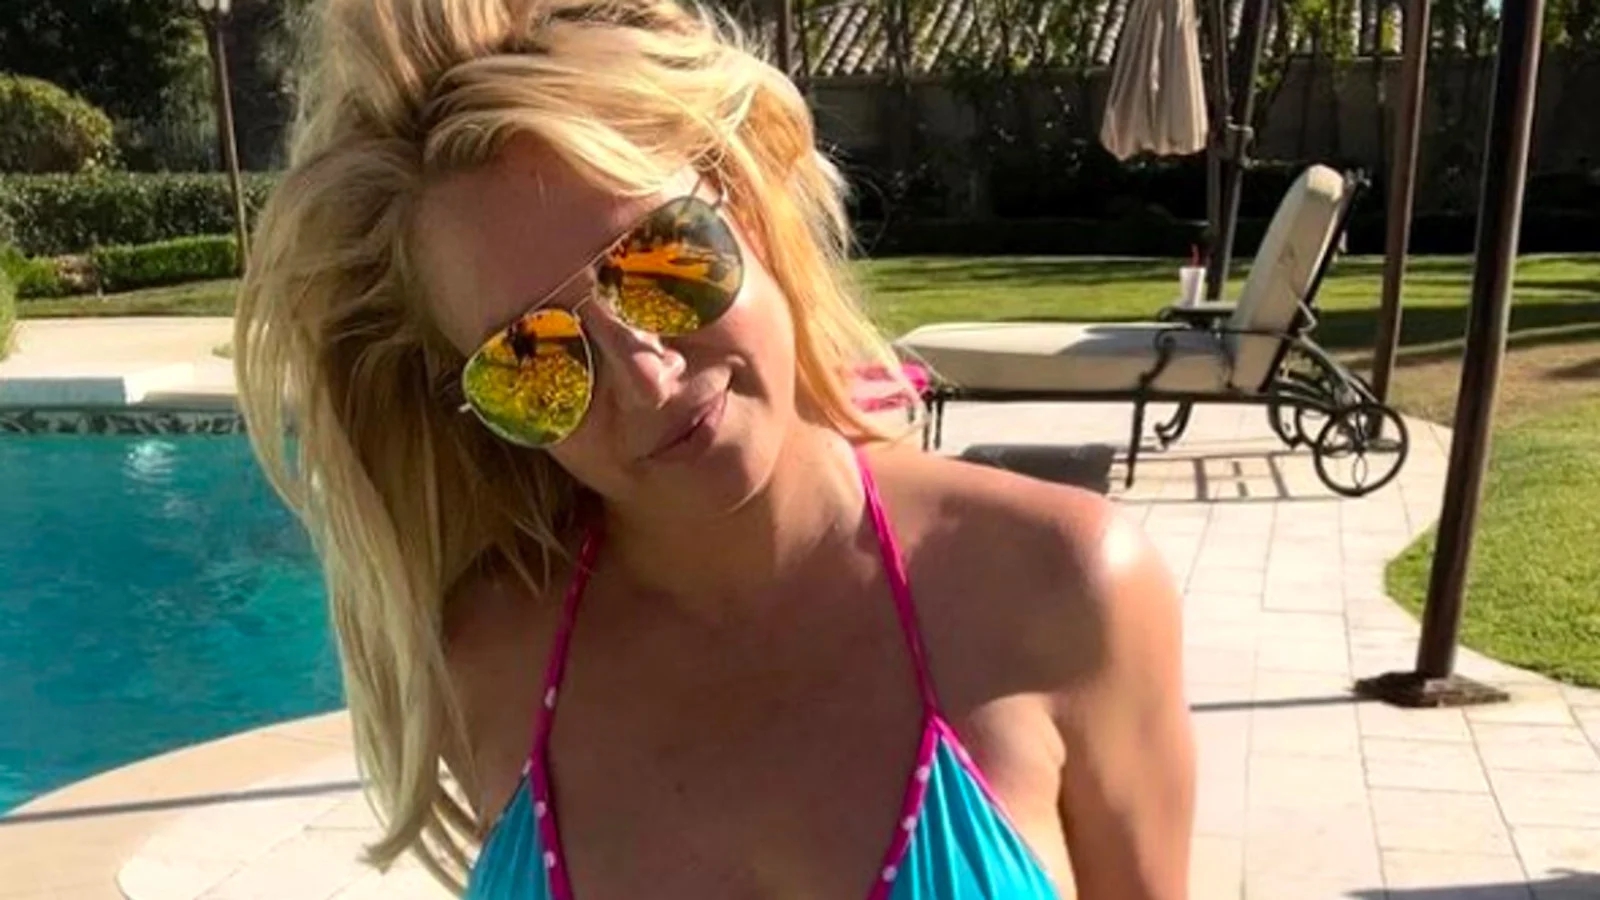 Britney Spears dances topless in a new video posted to Instagram just days after her divorce.